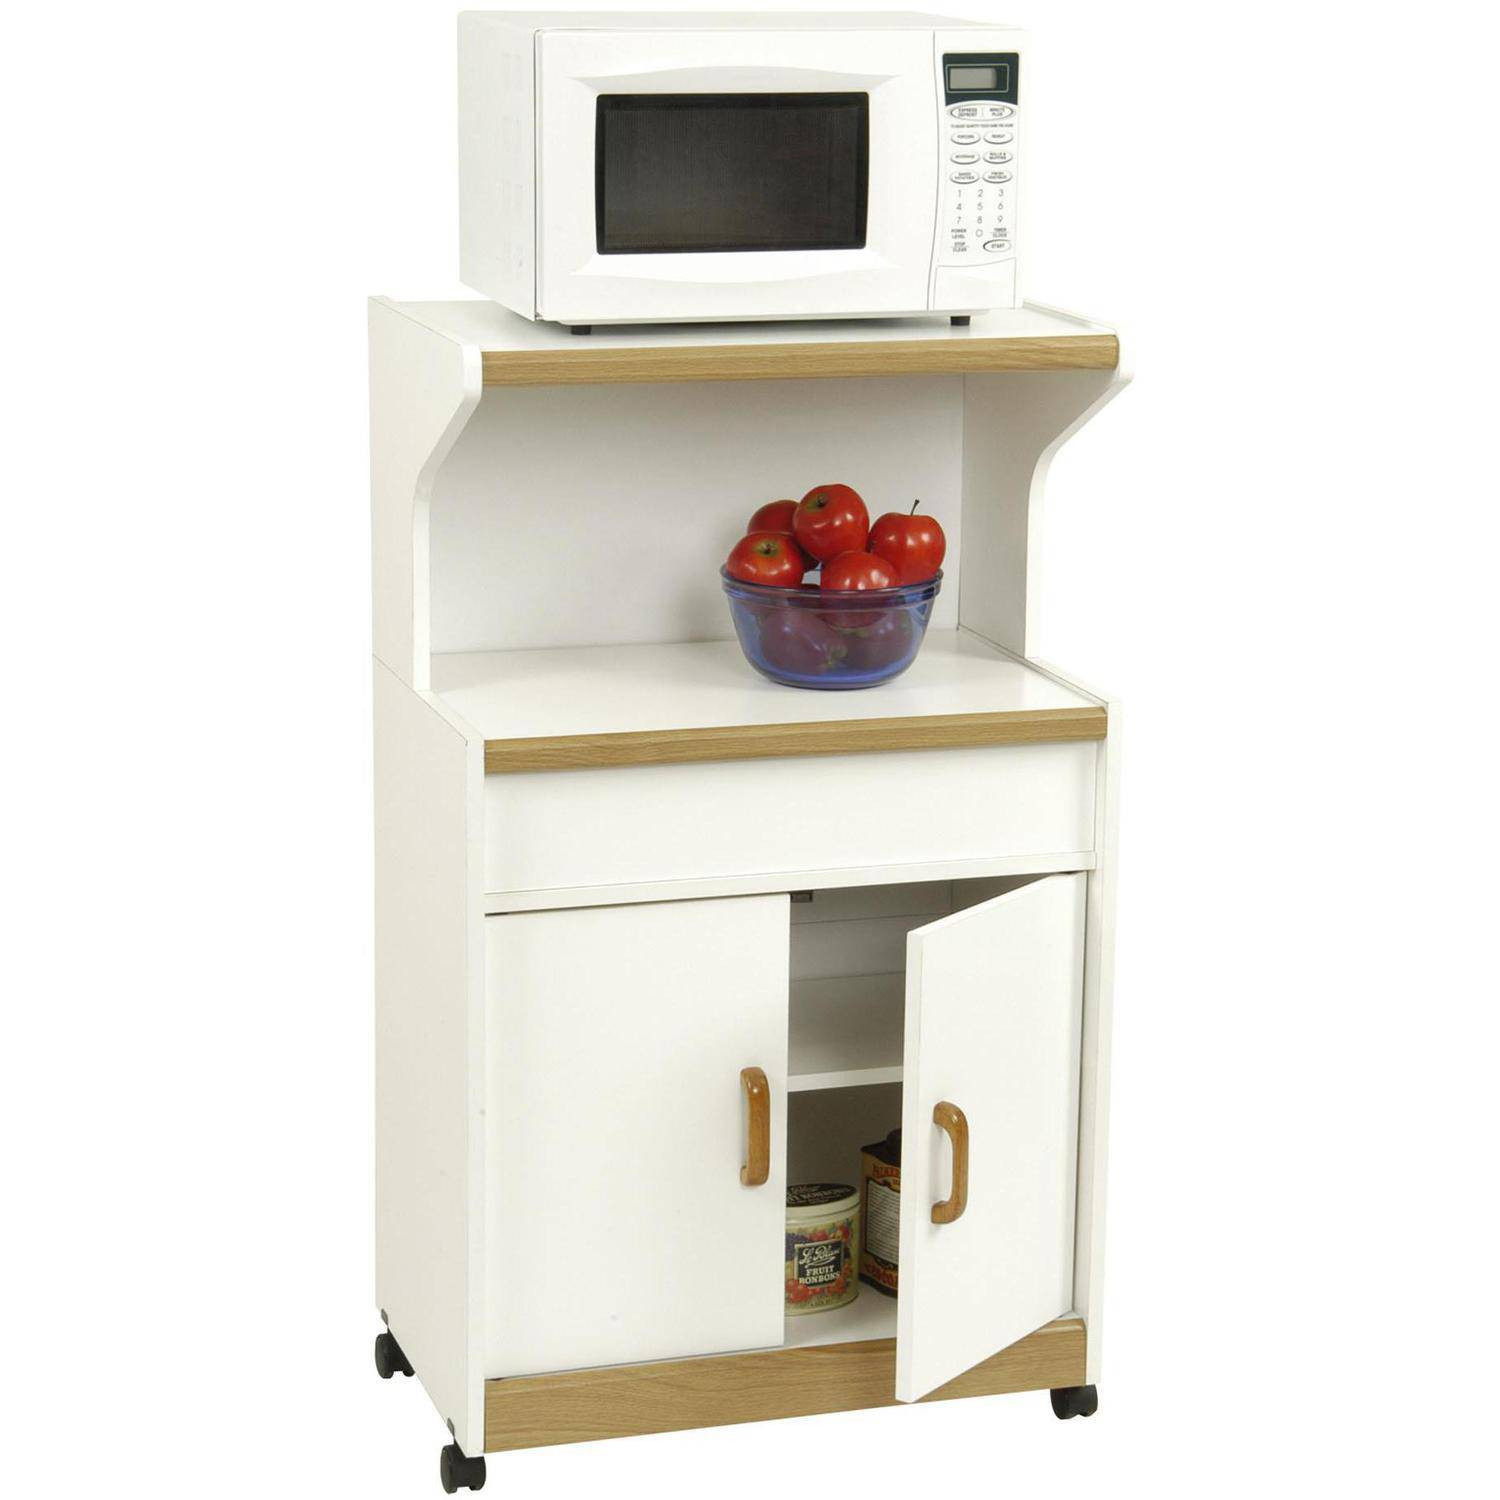 Kitchen Cabinet With Microwave Shelf
 Microwave Cabinet With Shelves White